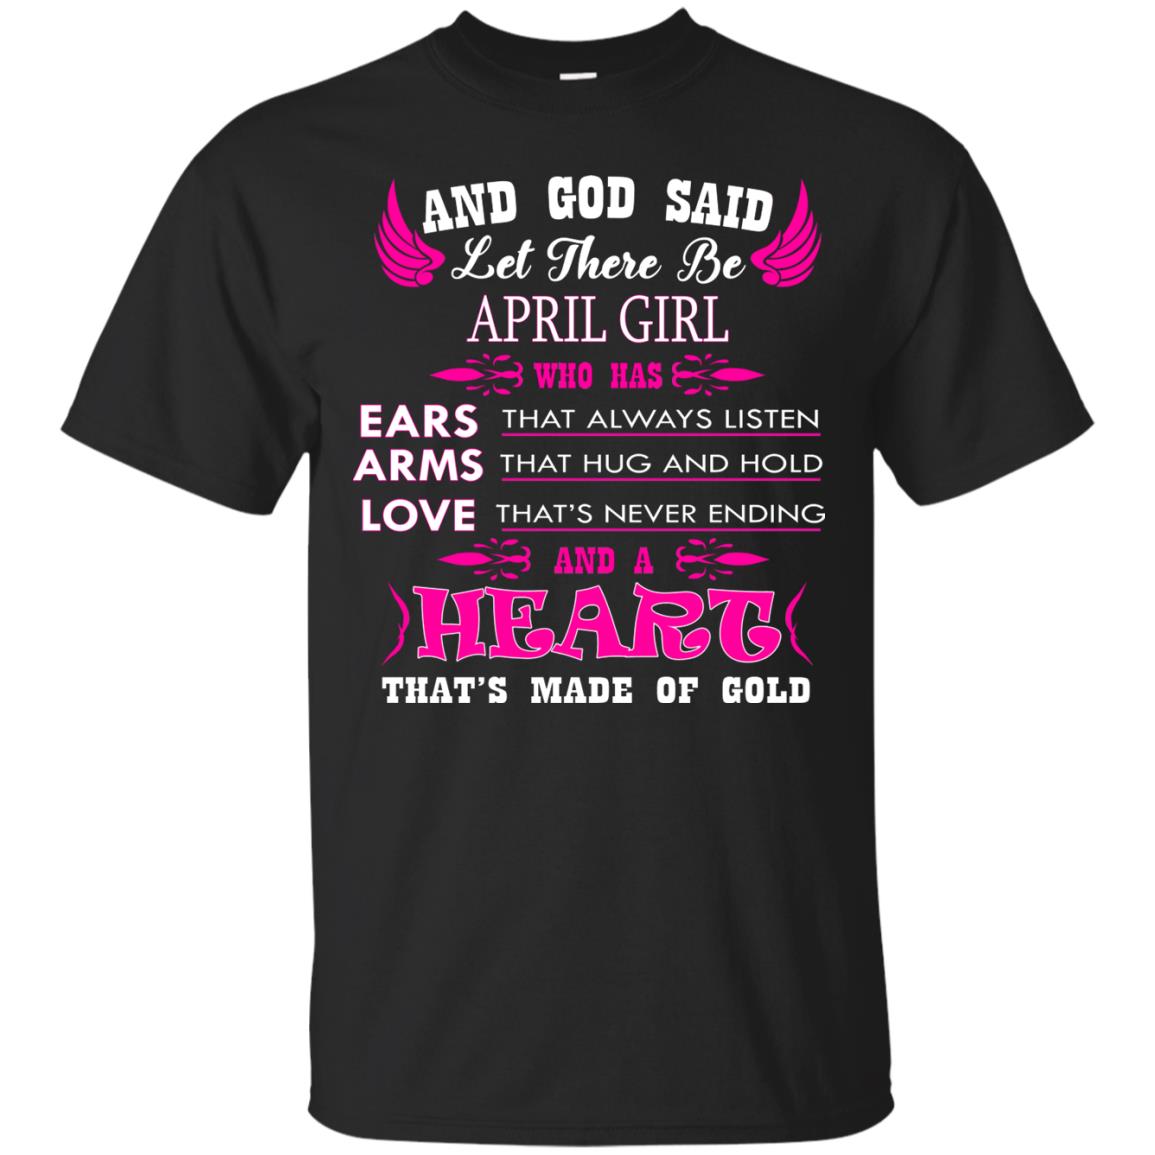 And God Said Let There Be April Girl Who Has Ears - Arms - Love Shirt